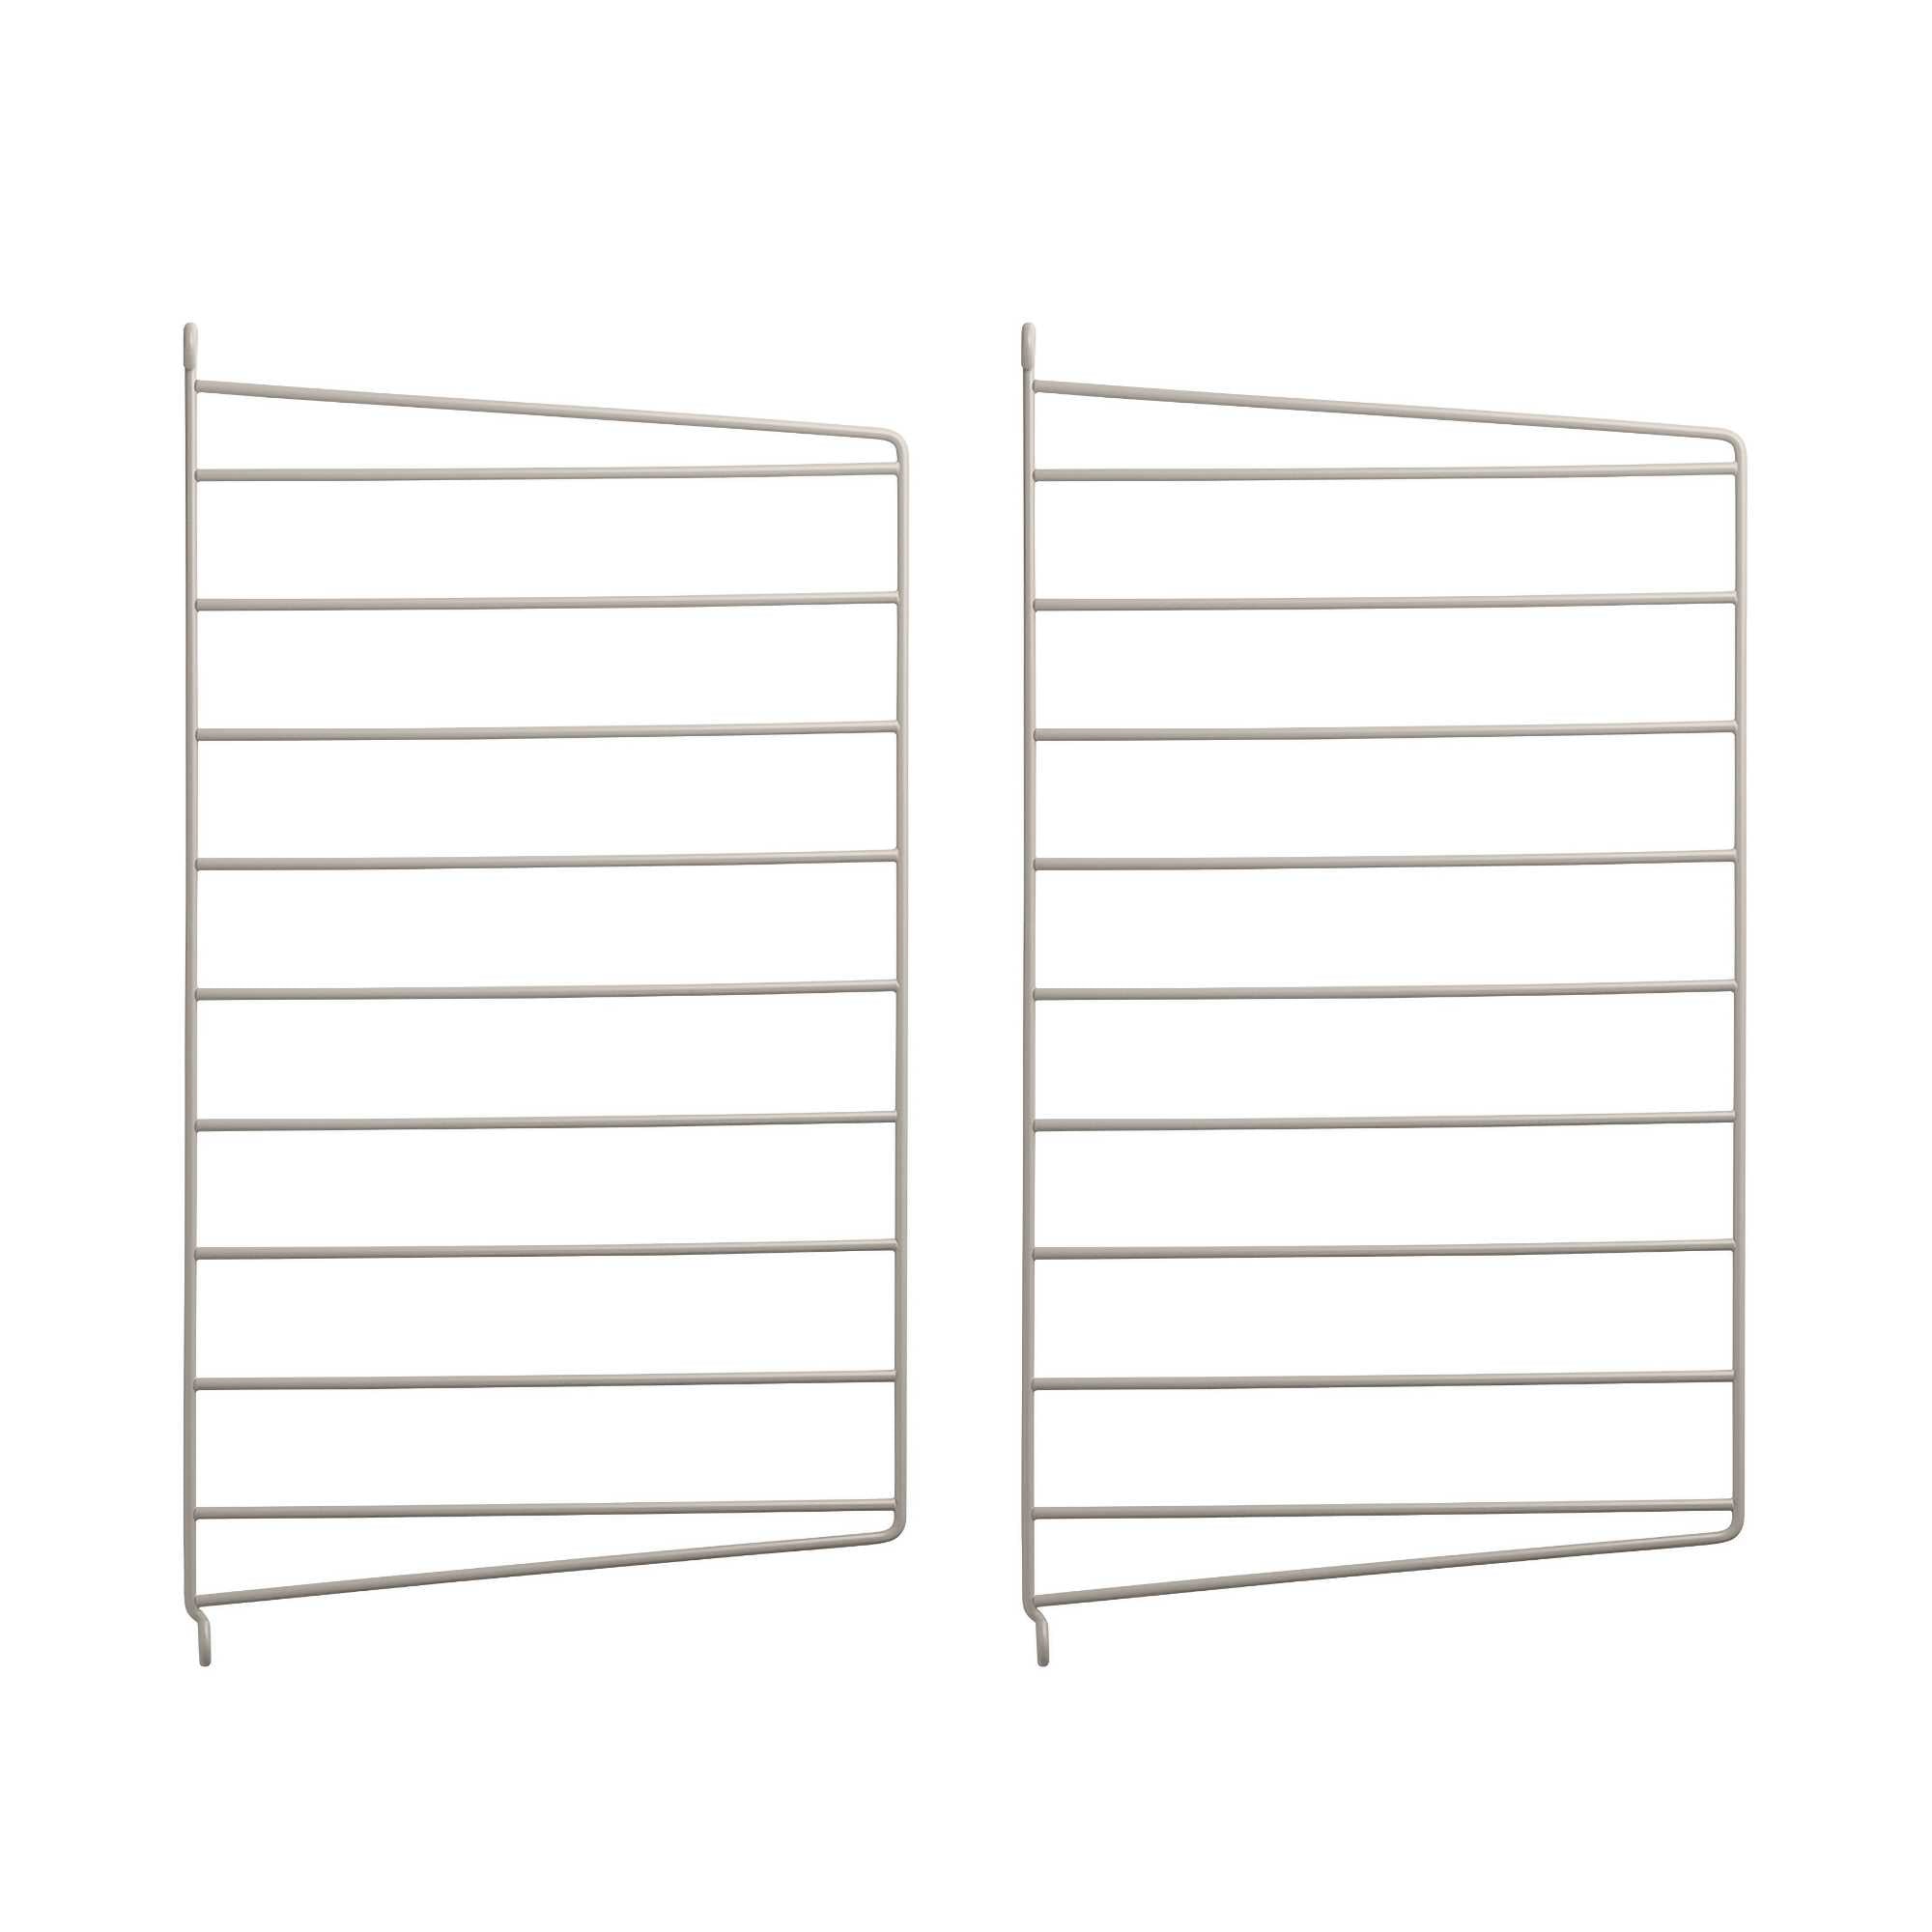 String Shelving System Wall Panels 2-Pack, Beige (H50xD30cm)